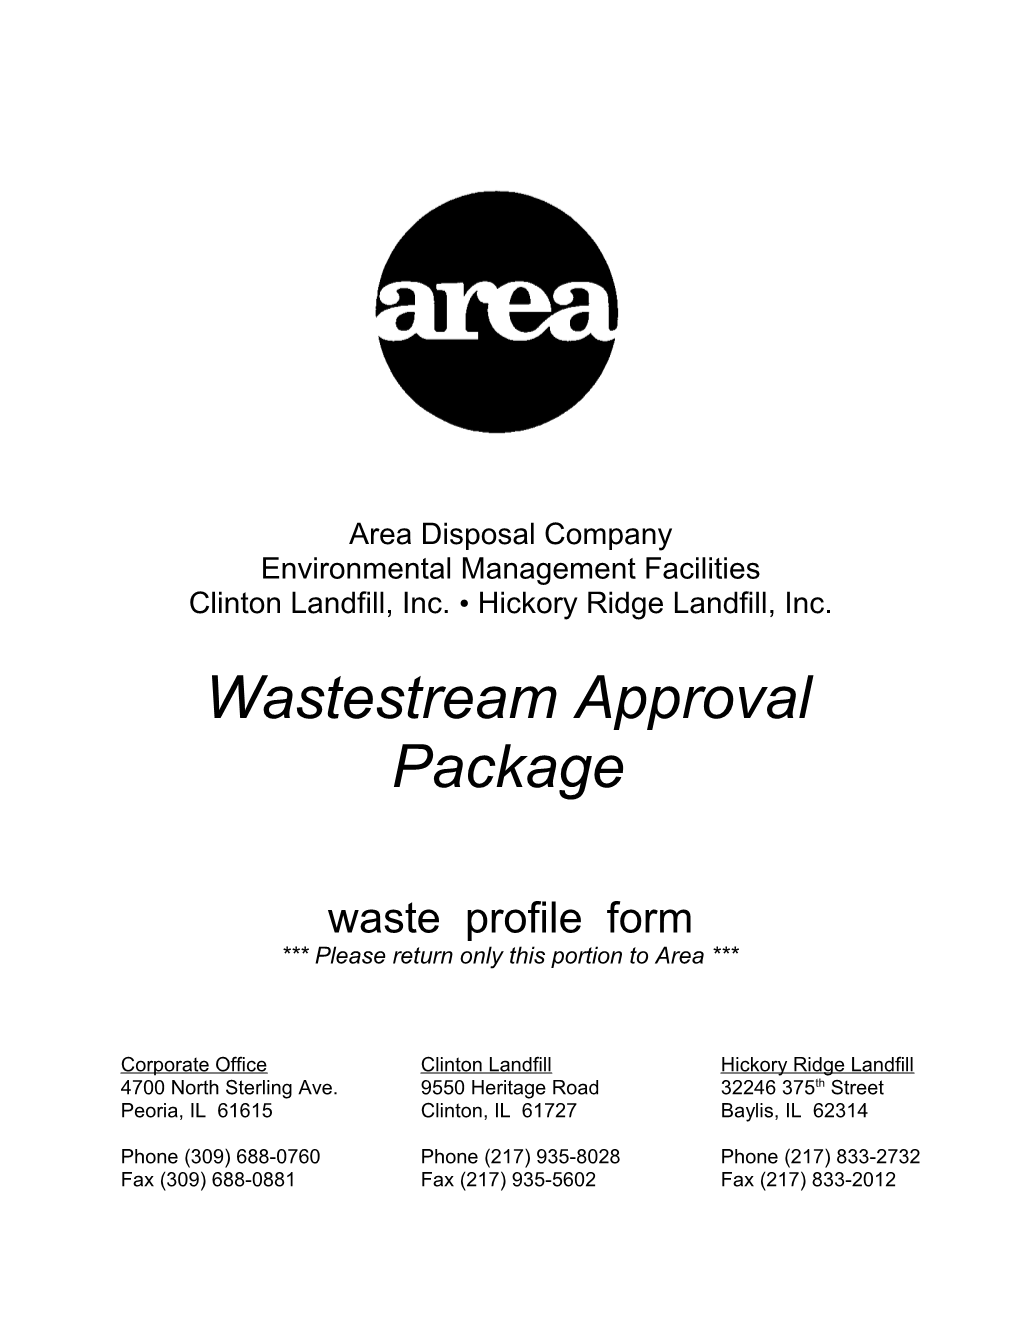 Waste Profile Package